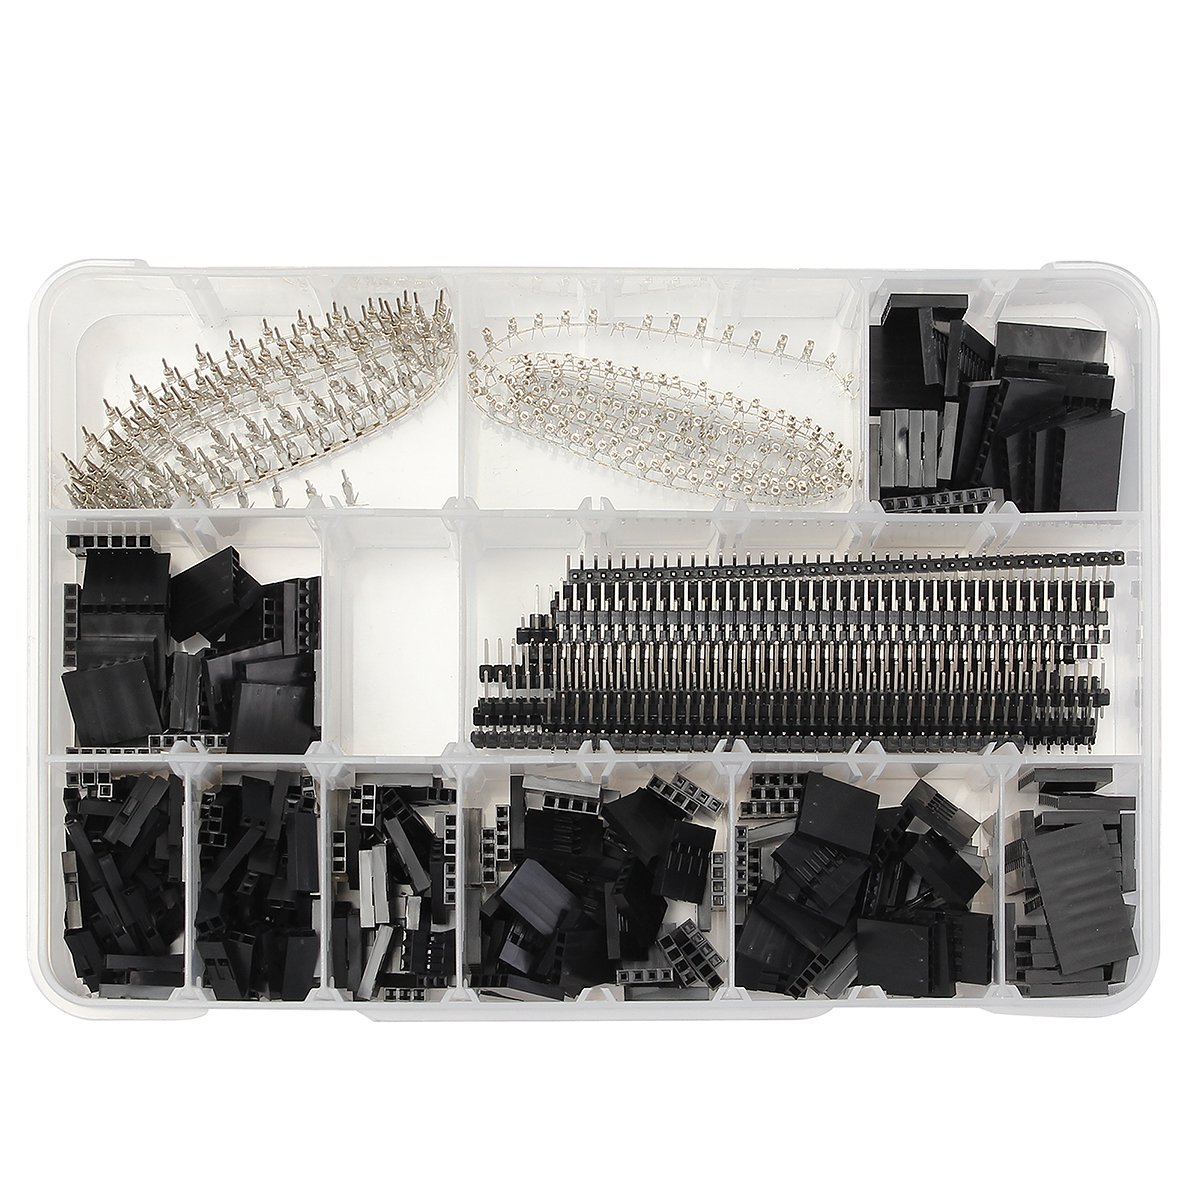 Geekcreit® 1450pcs 2.54mm Male Female Dupont Wire Jumper With Pin Header Connector Housing Kit 2